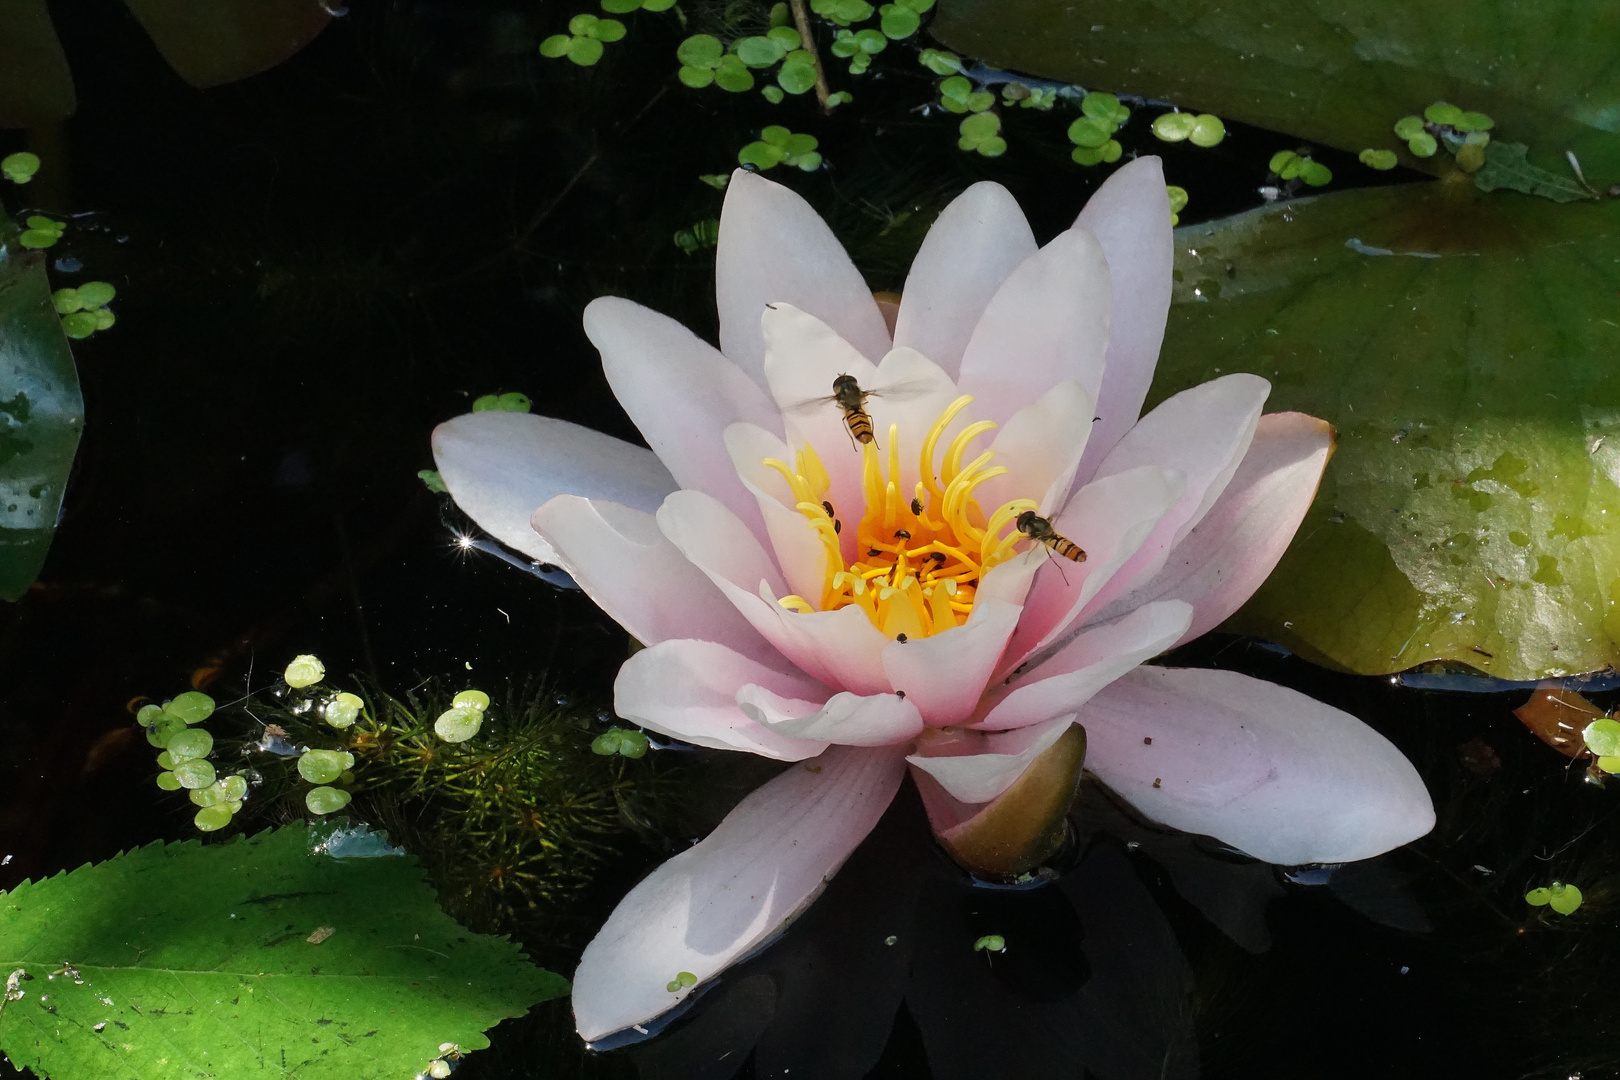 life on the waterlily